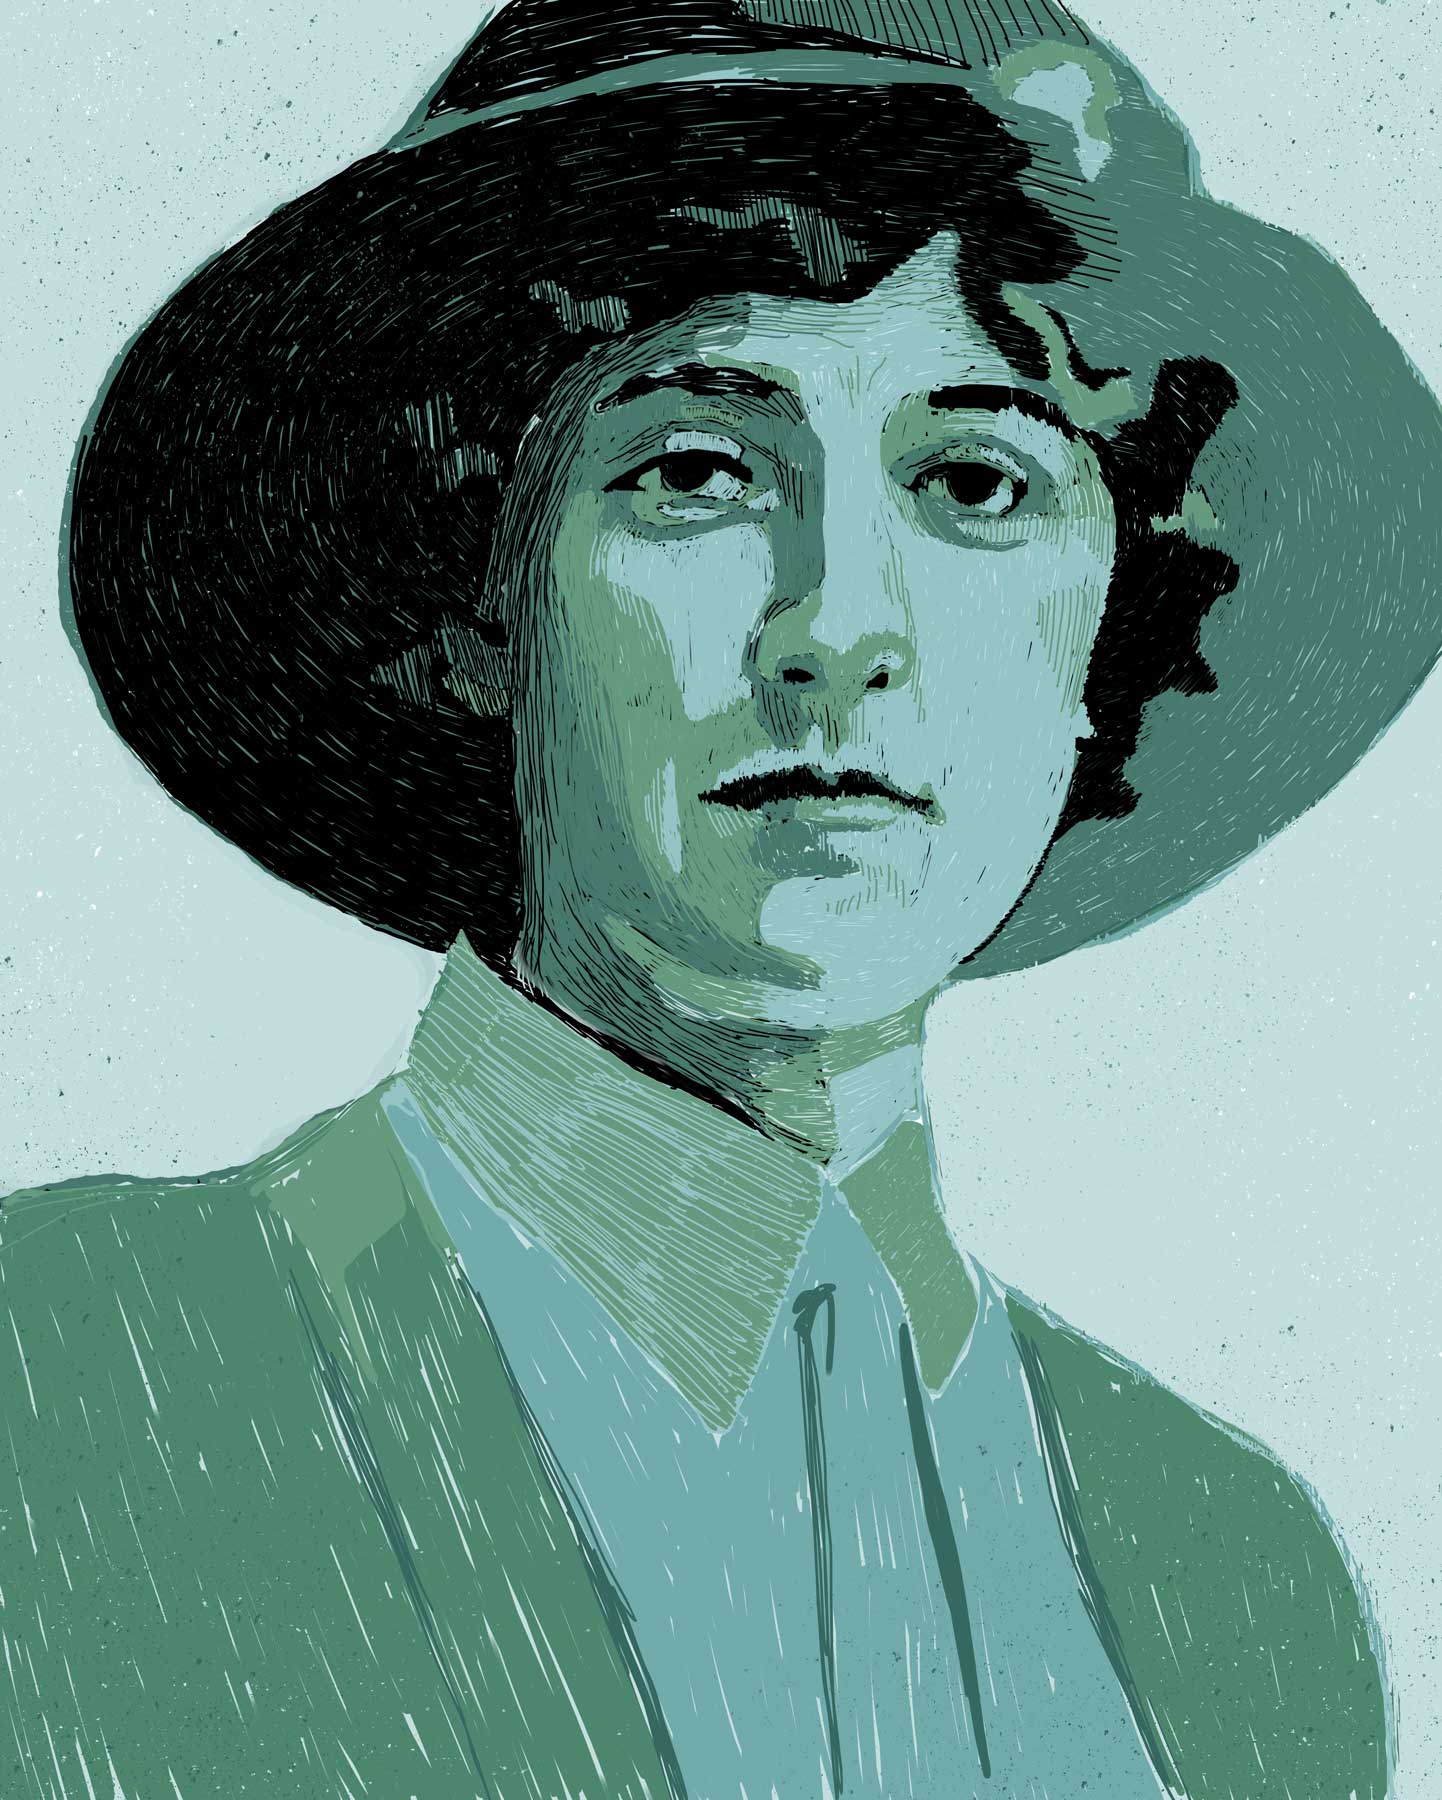 Portrait of Agatha Christi – Digital Illustration 2019 was an English writer known for her detective novels and short story collections, particularly those revolving around fictional detectives Hercule Poirot and Miss Marple.